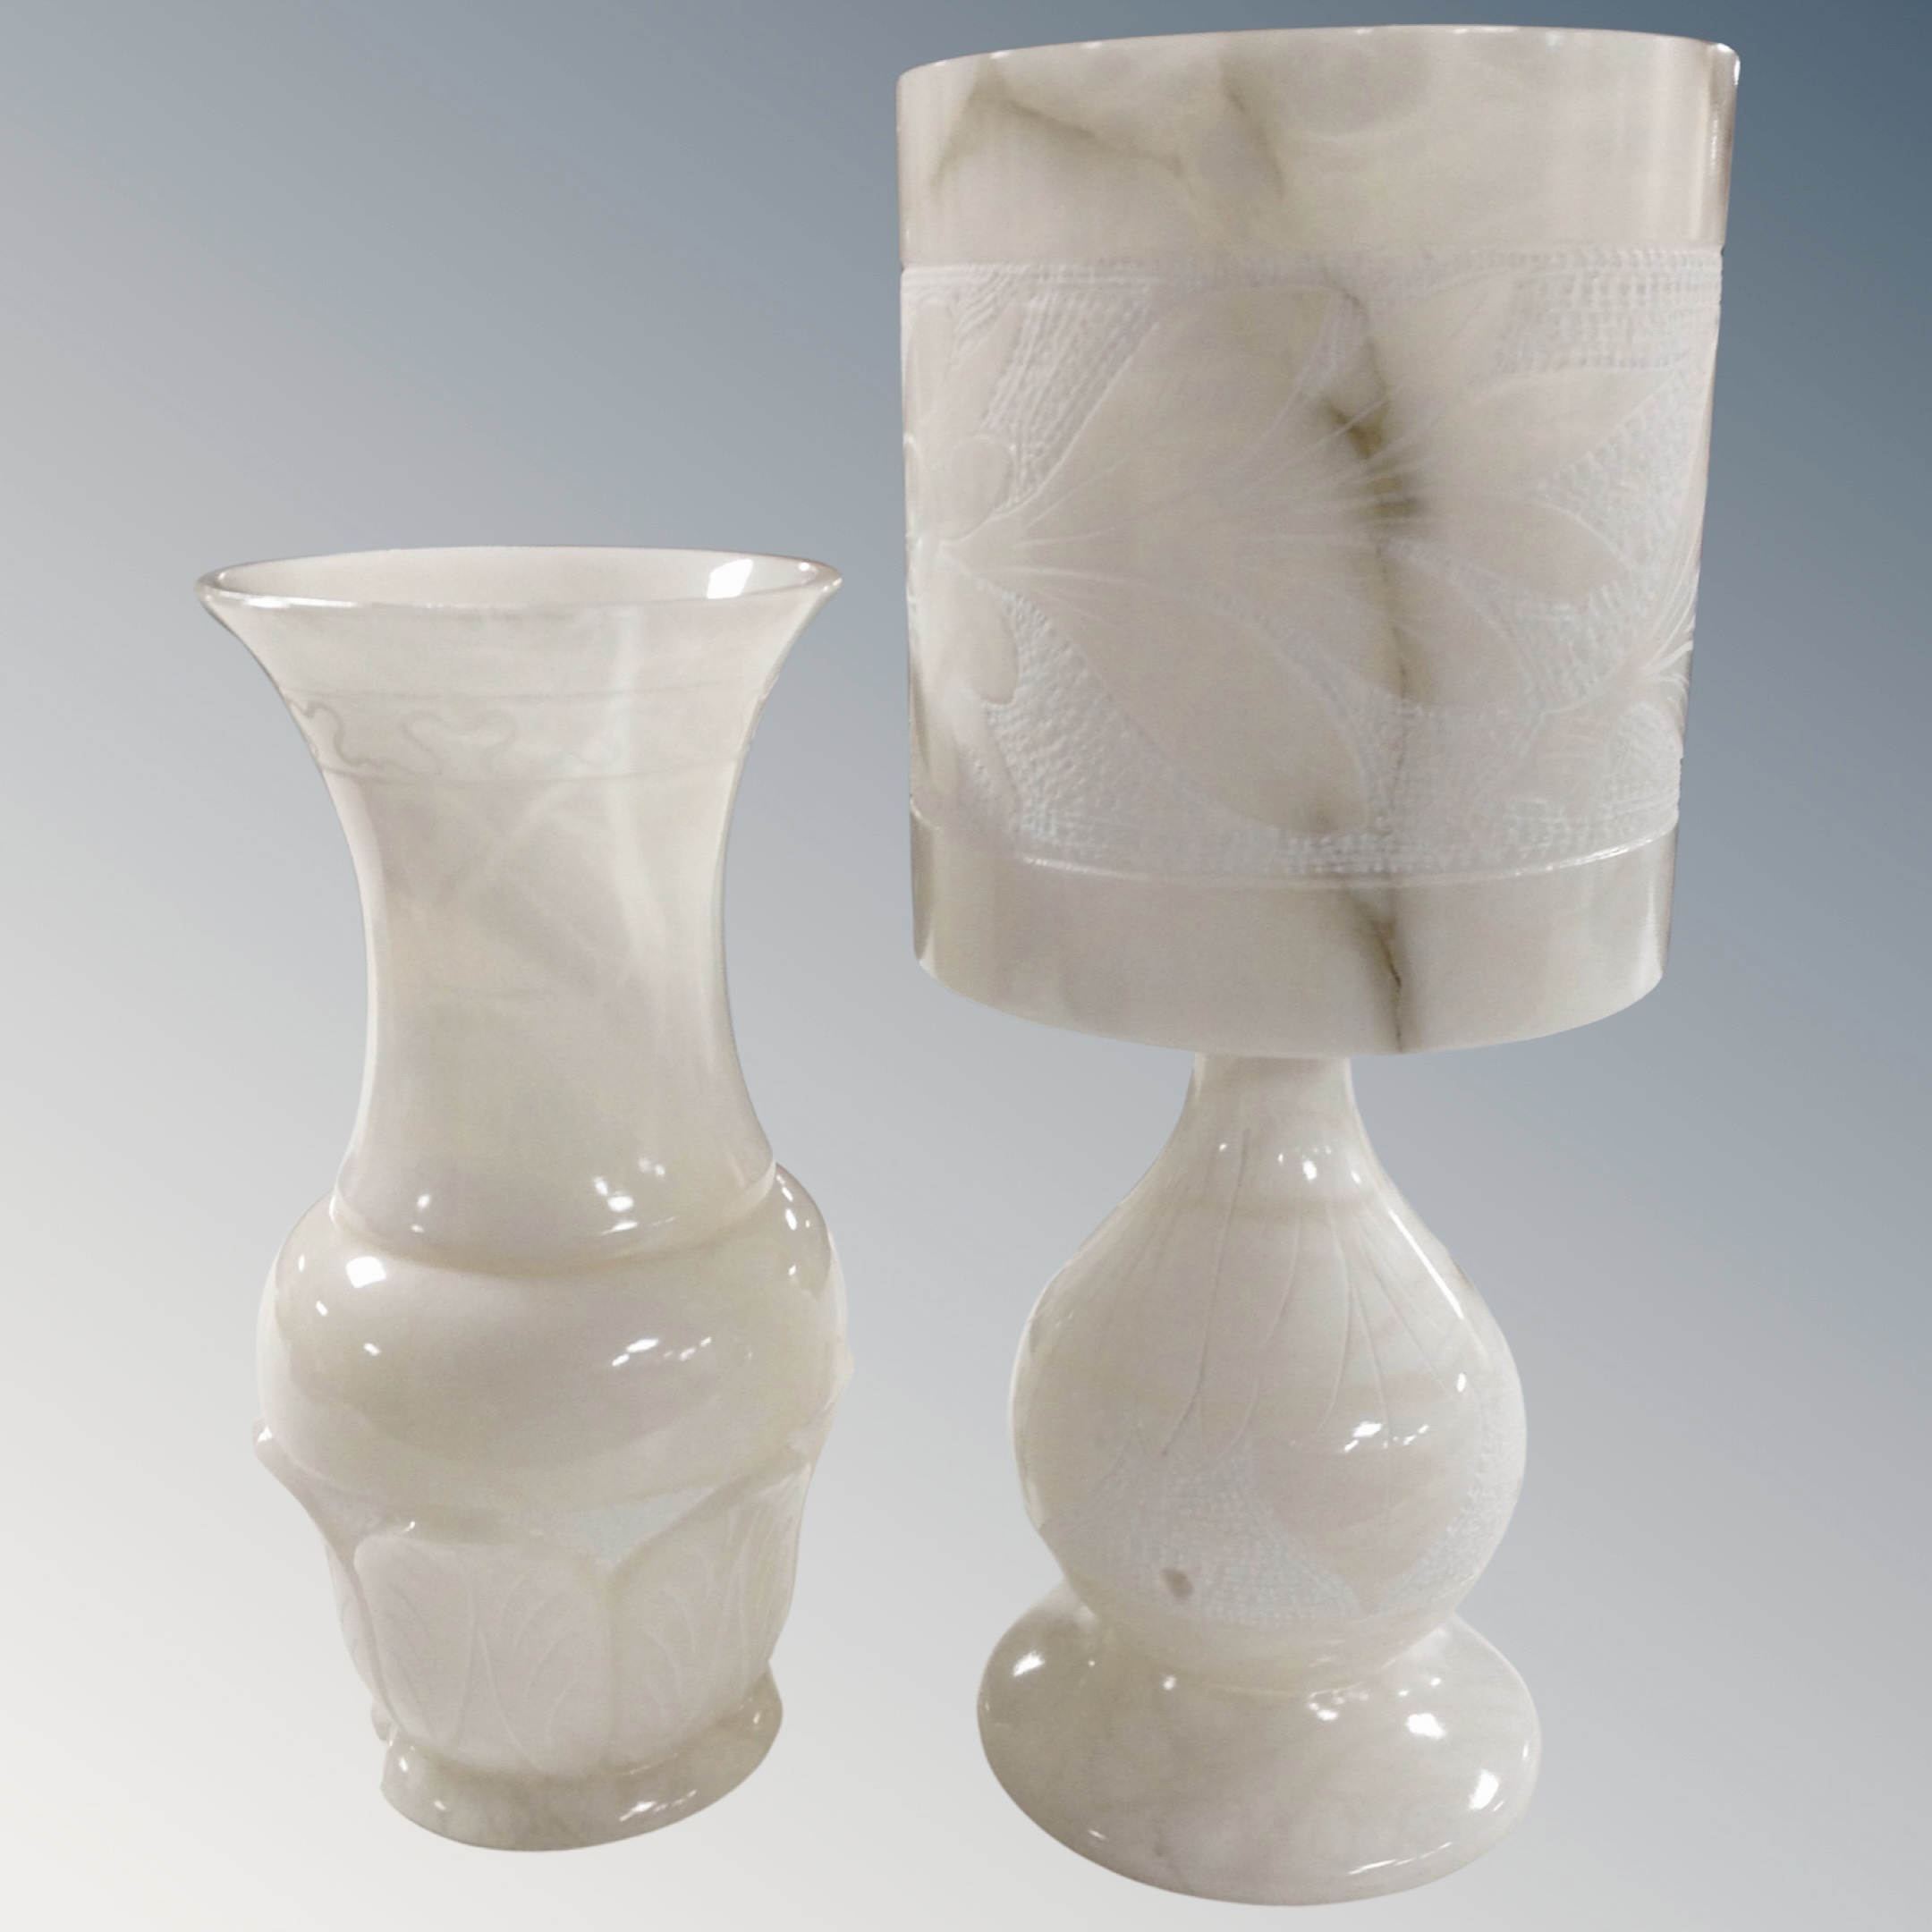 An alabaster table lamp with shade (height 42cm), together with a further alabaster table lamp.